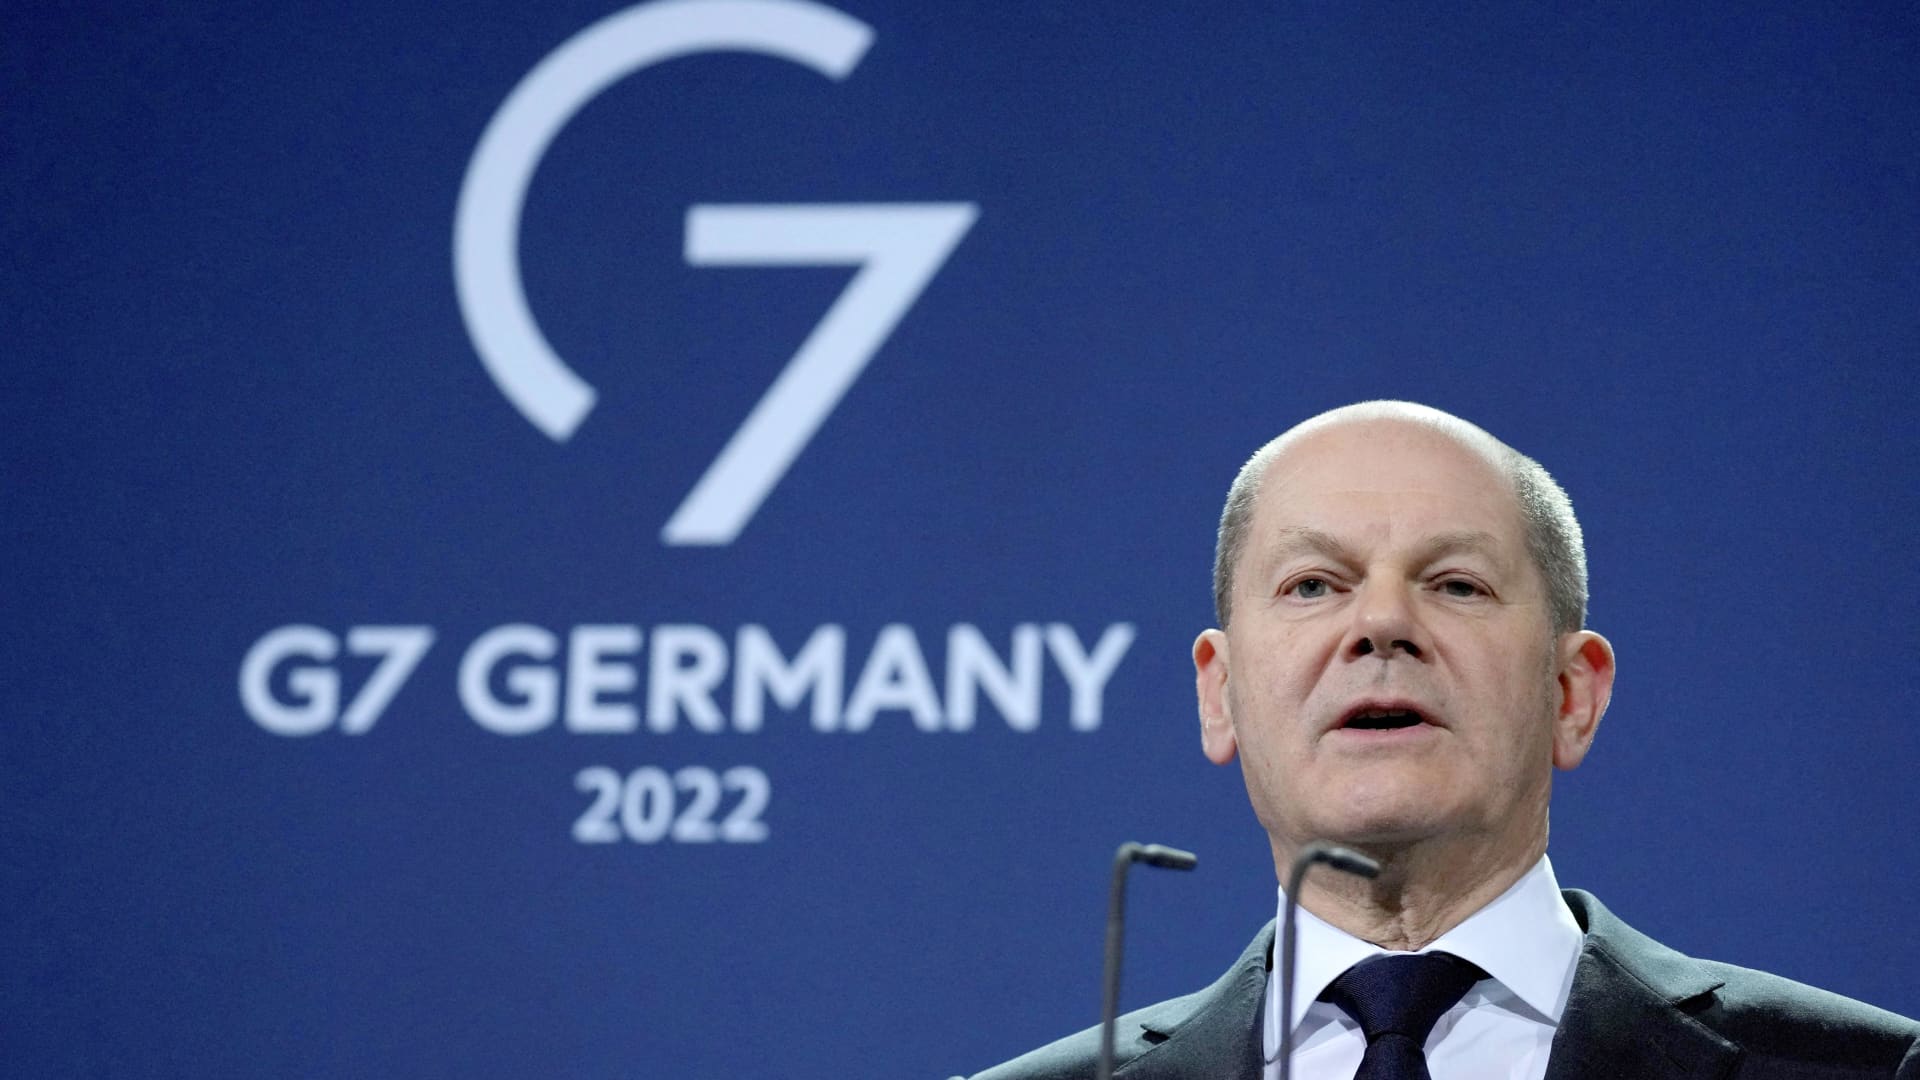 German Chancellor Olaf Scholz speaks during a joint news conference with German Economy and Climate Minister Robert Habeck and German Finance Minister Christian Lindner in Berlin, Germany, January 21, 2022.